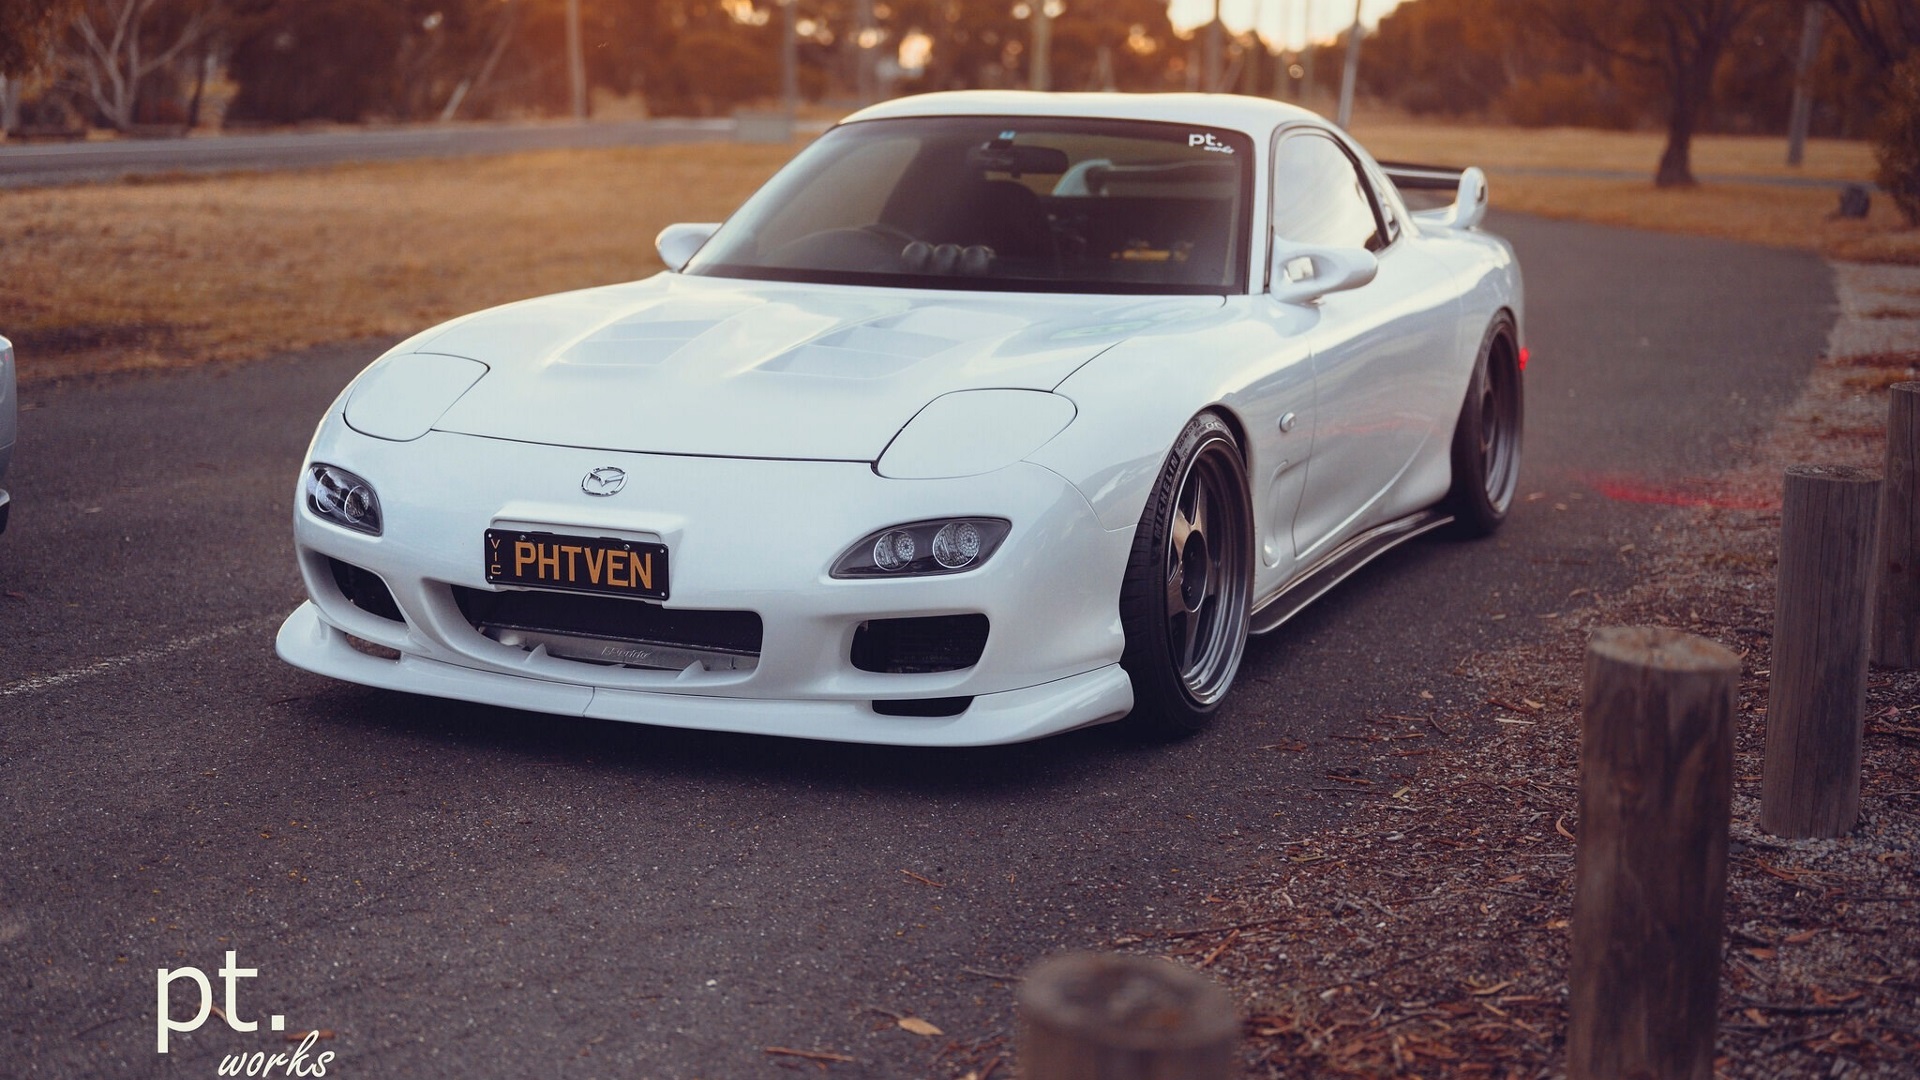 General 1920x1080 Mazda RX-7 Mazda Japanese cars white cars sports car road car vehicle pop-up headlights outdoors PT works